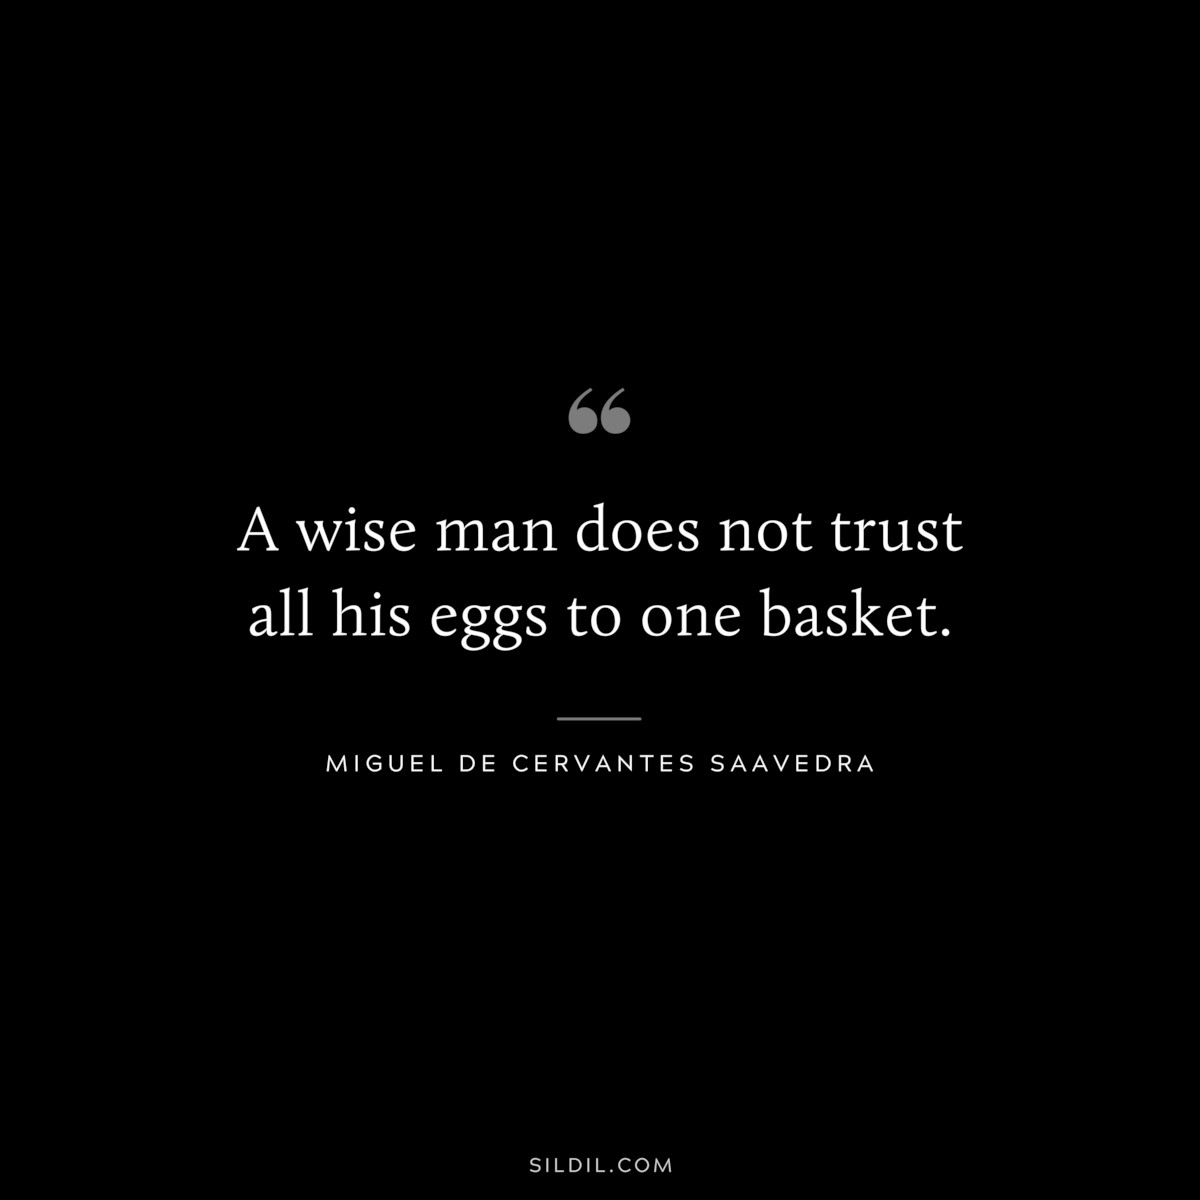 A wise man does not trust all his eggs to one basket. ― Miguel de Cervantes Saavedra